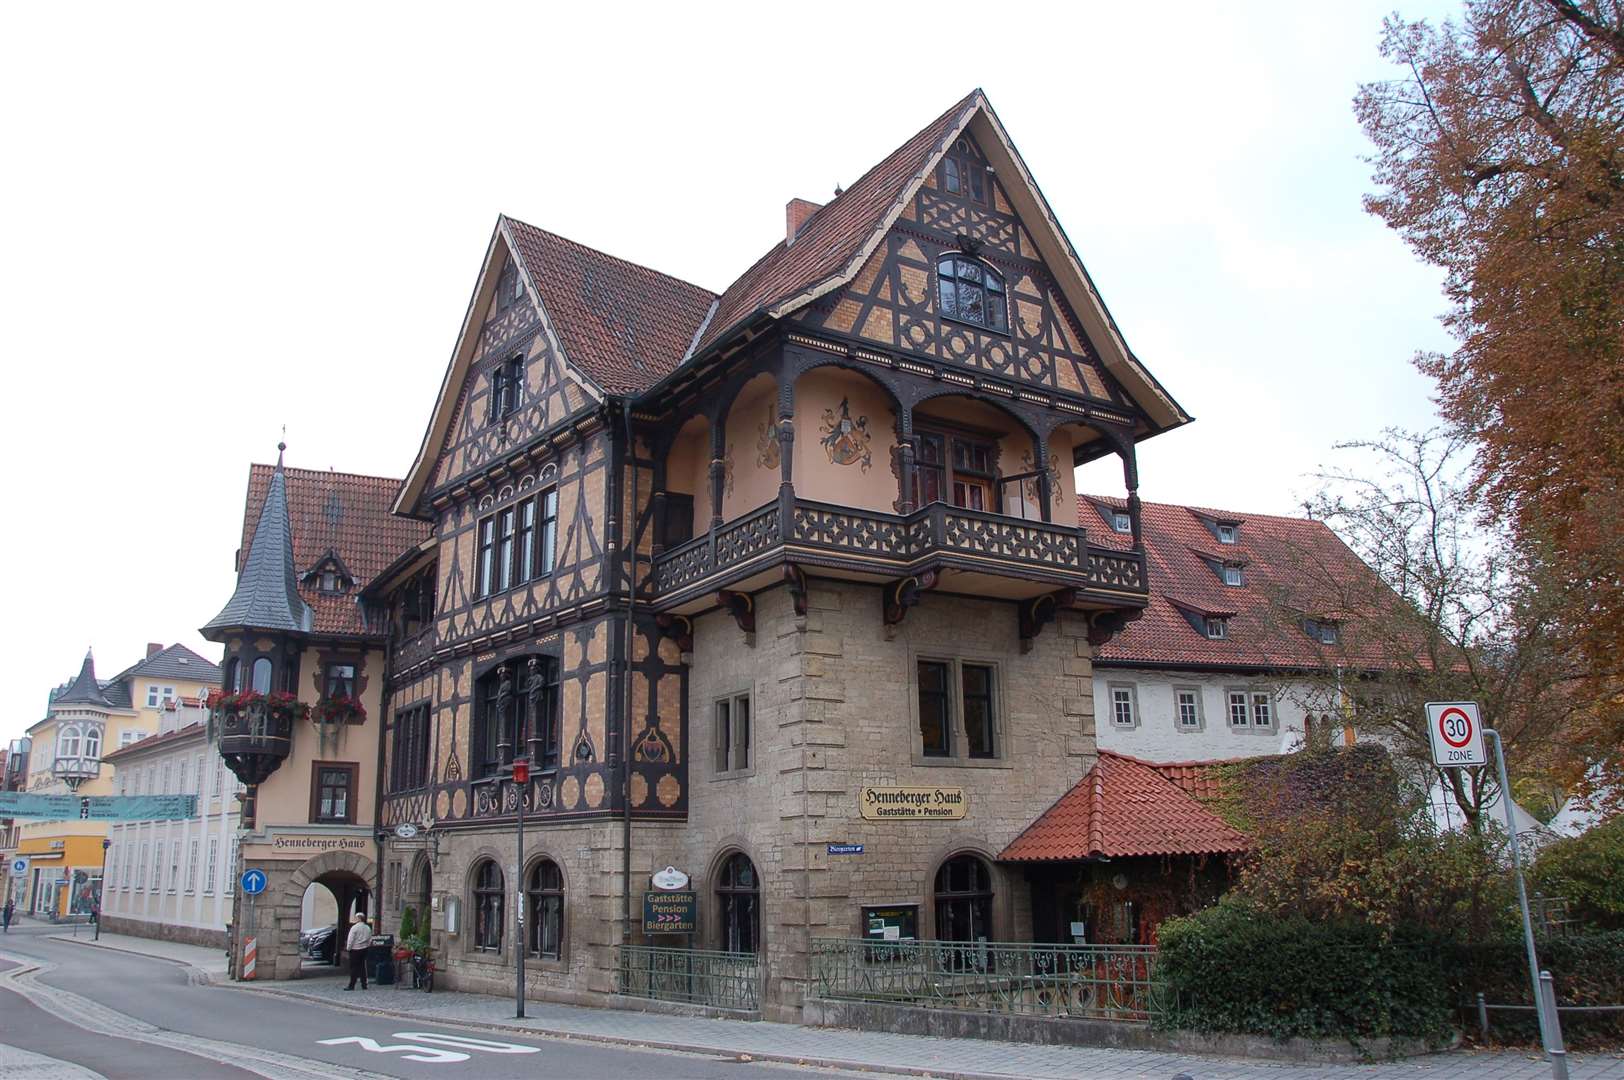 Just one of the many lovely old buildings in Meiningen.